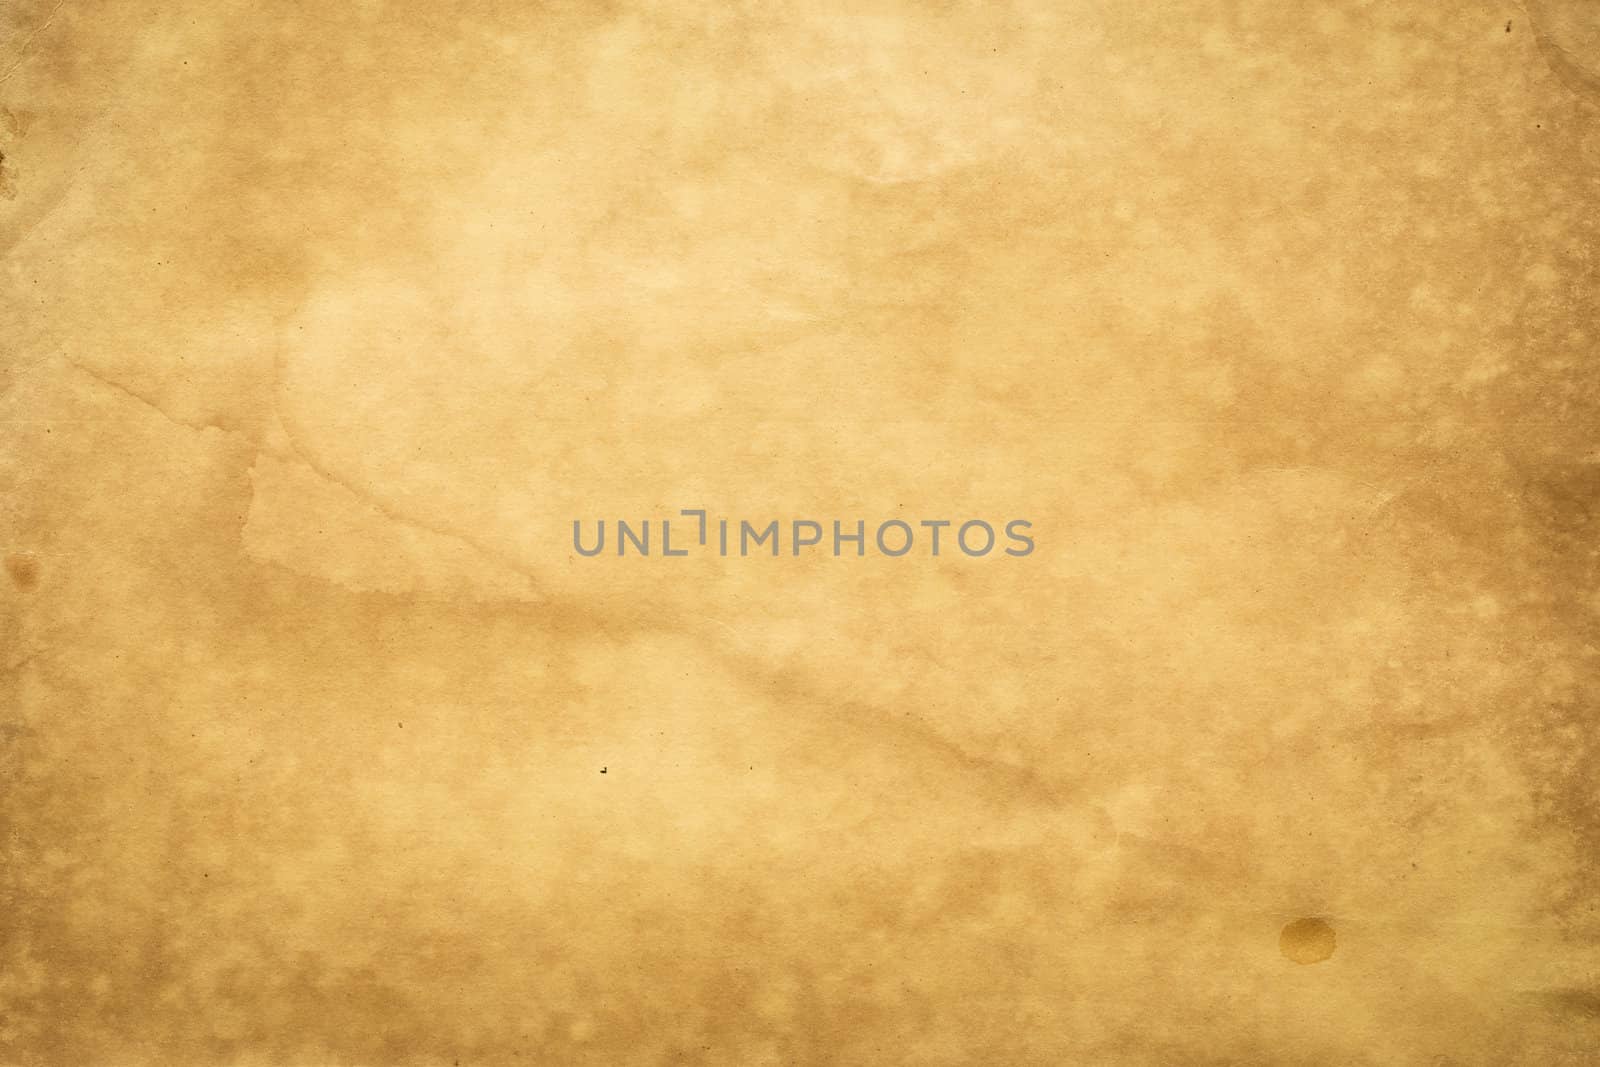 Extra large Old grunge paper for background by Suriyaphoto